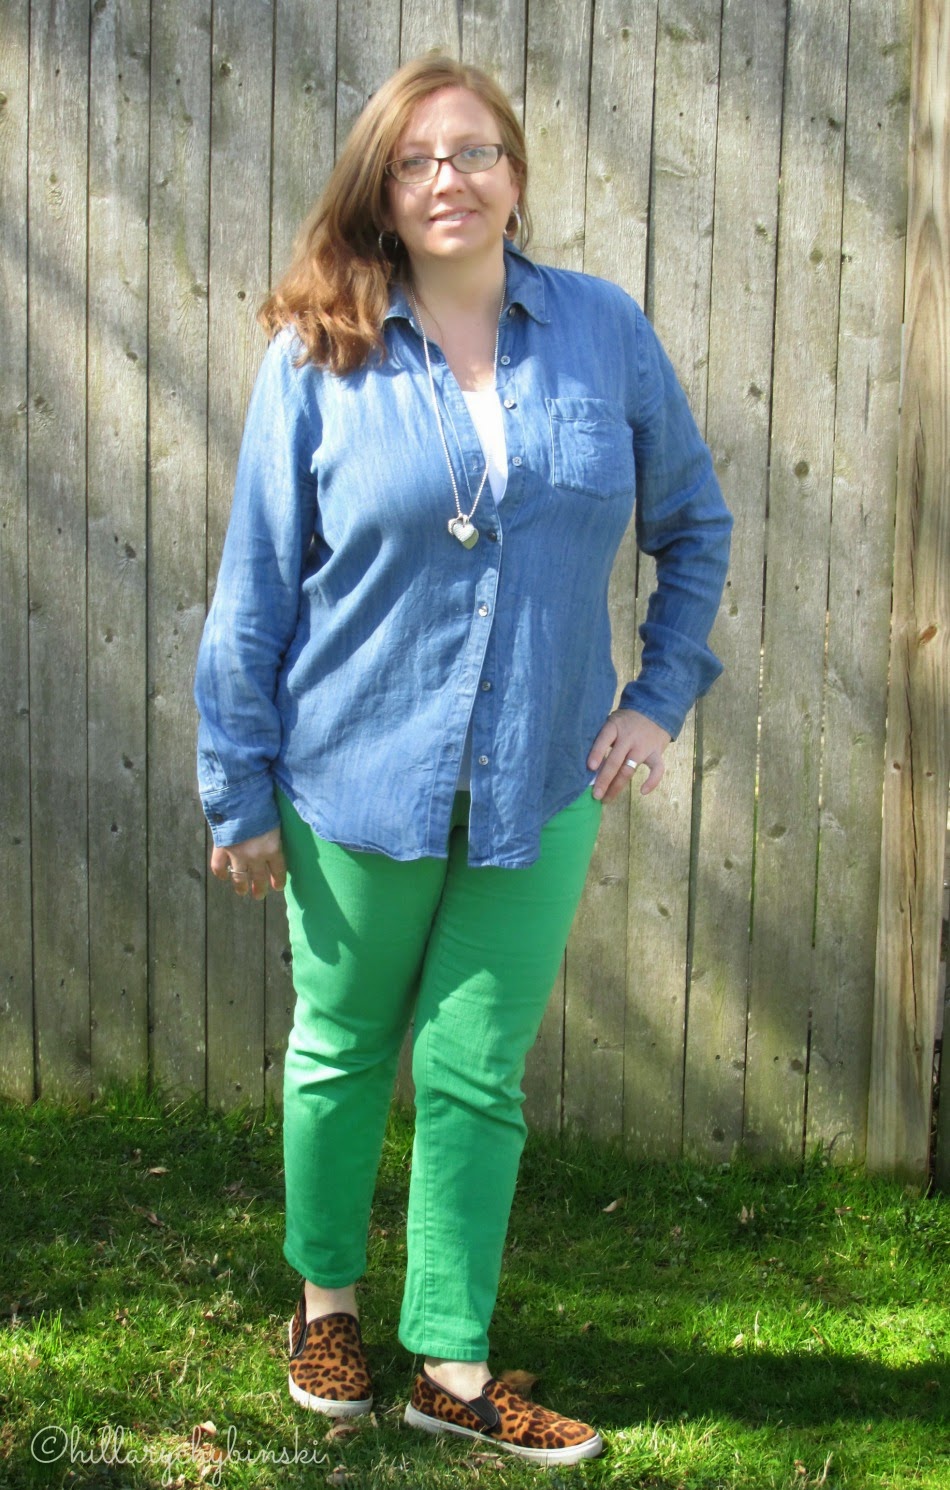 Colored Jeans Styled for Spring - Green Jeans with a Denim Top